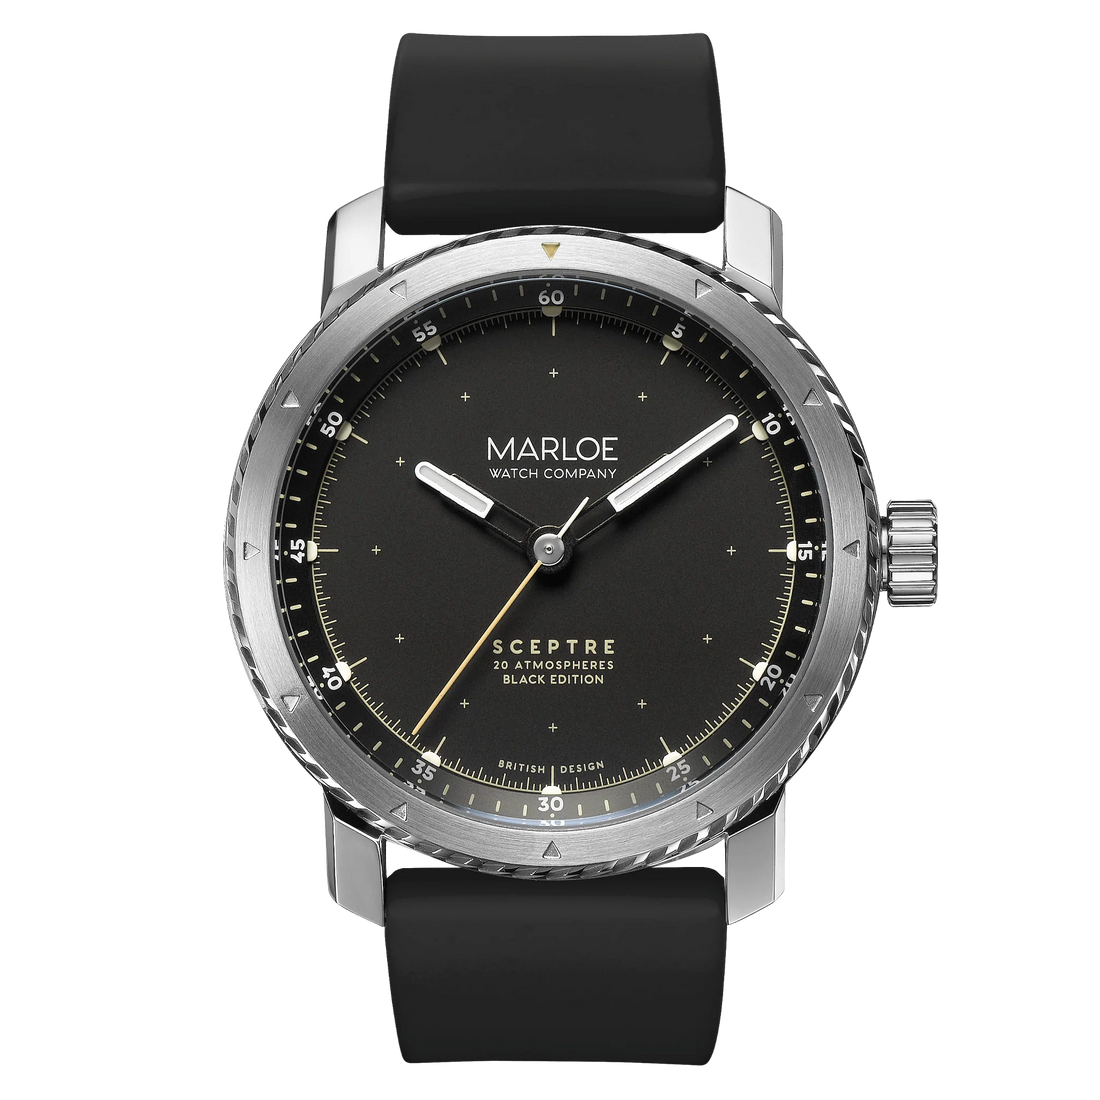 Dive deep into naval tradition with the new Marloe Sceptre